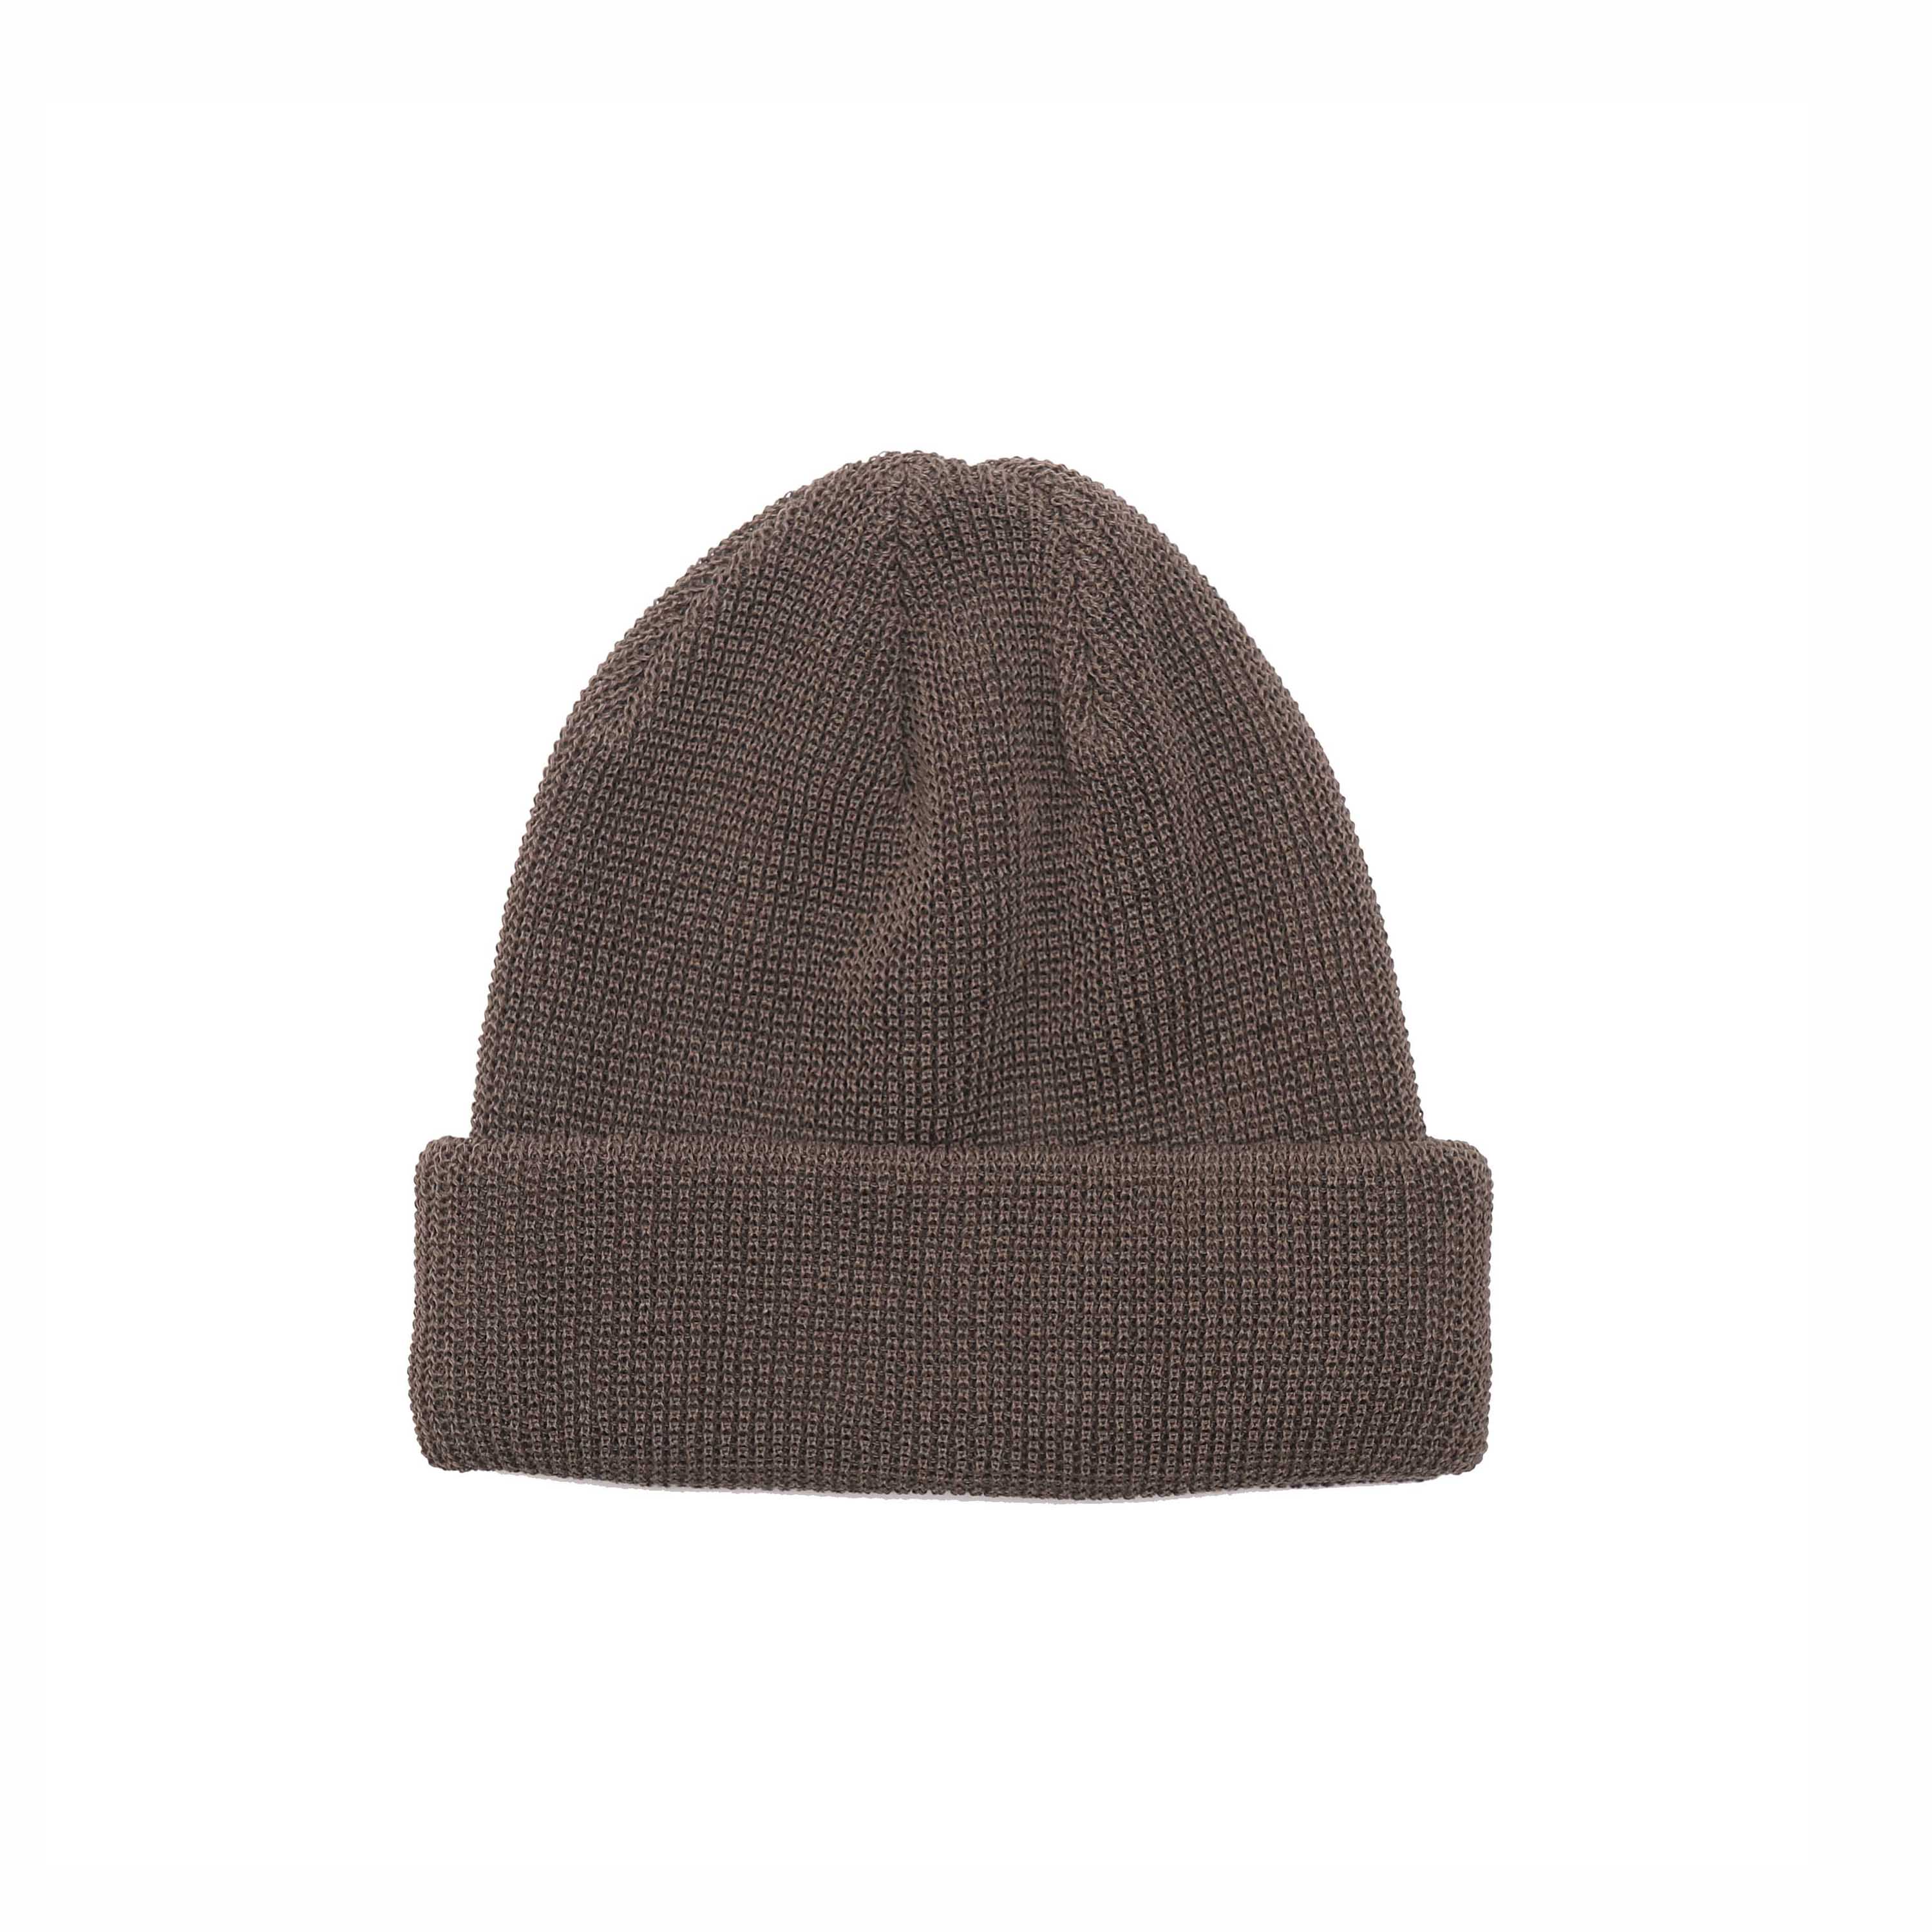 SOUTH FORK COTTON KNIT CAP - COCOA BROWN